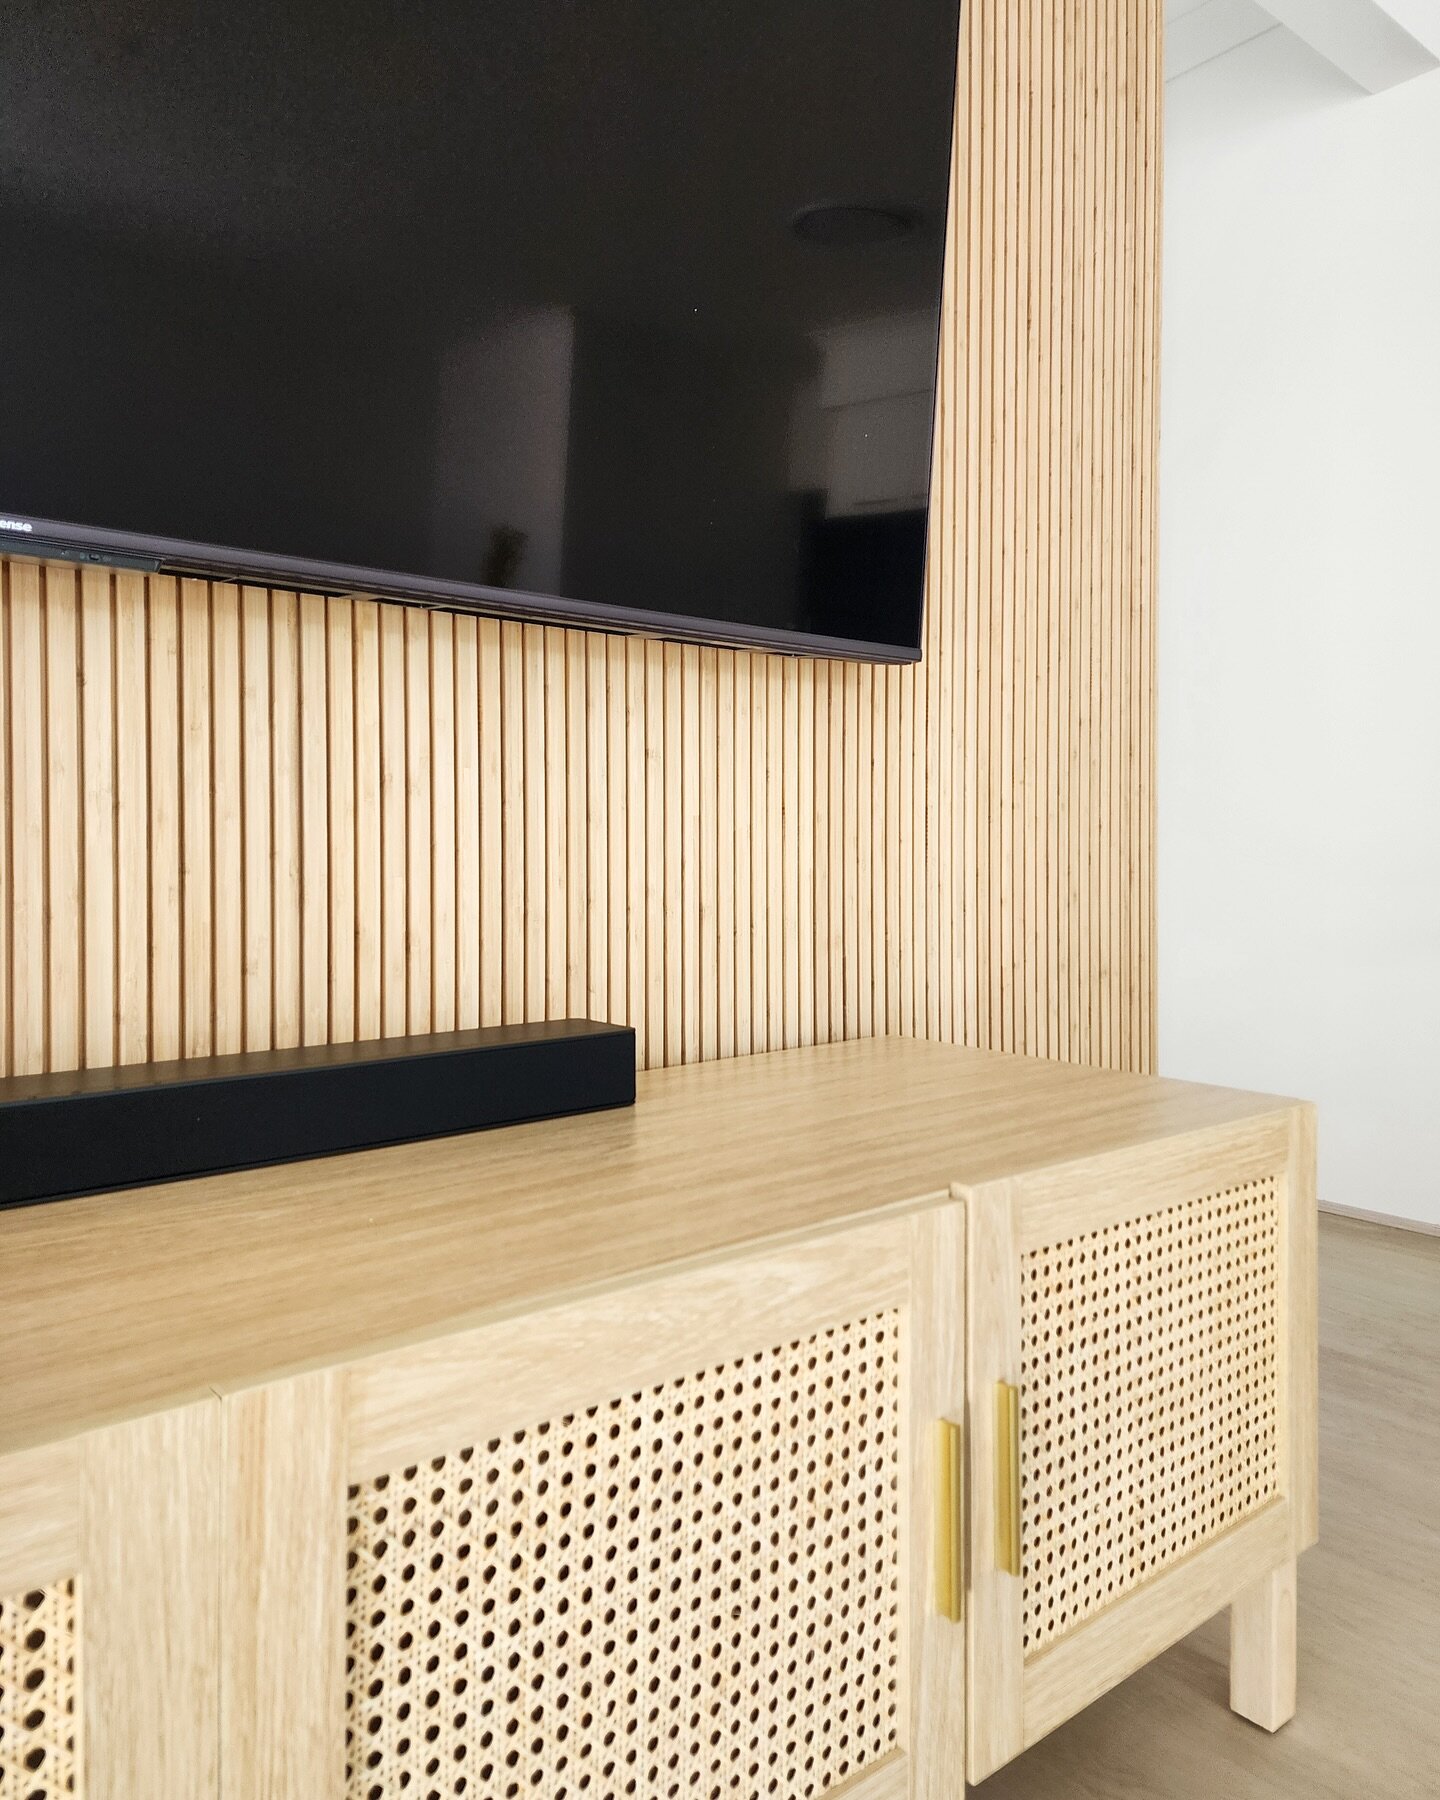 Natural, beautiful and timeless. Our bamboo panelling can elevate your indoor or outdoor spaces, both residential and commercial. DM us to discuss your next project !